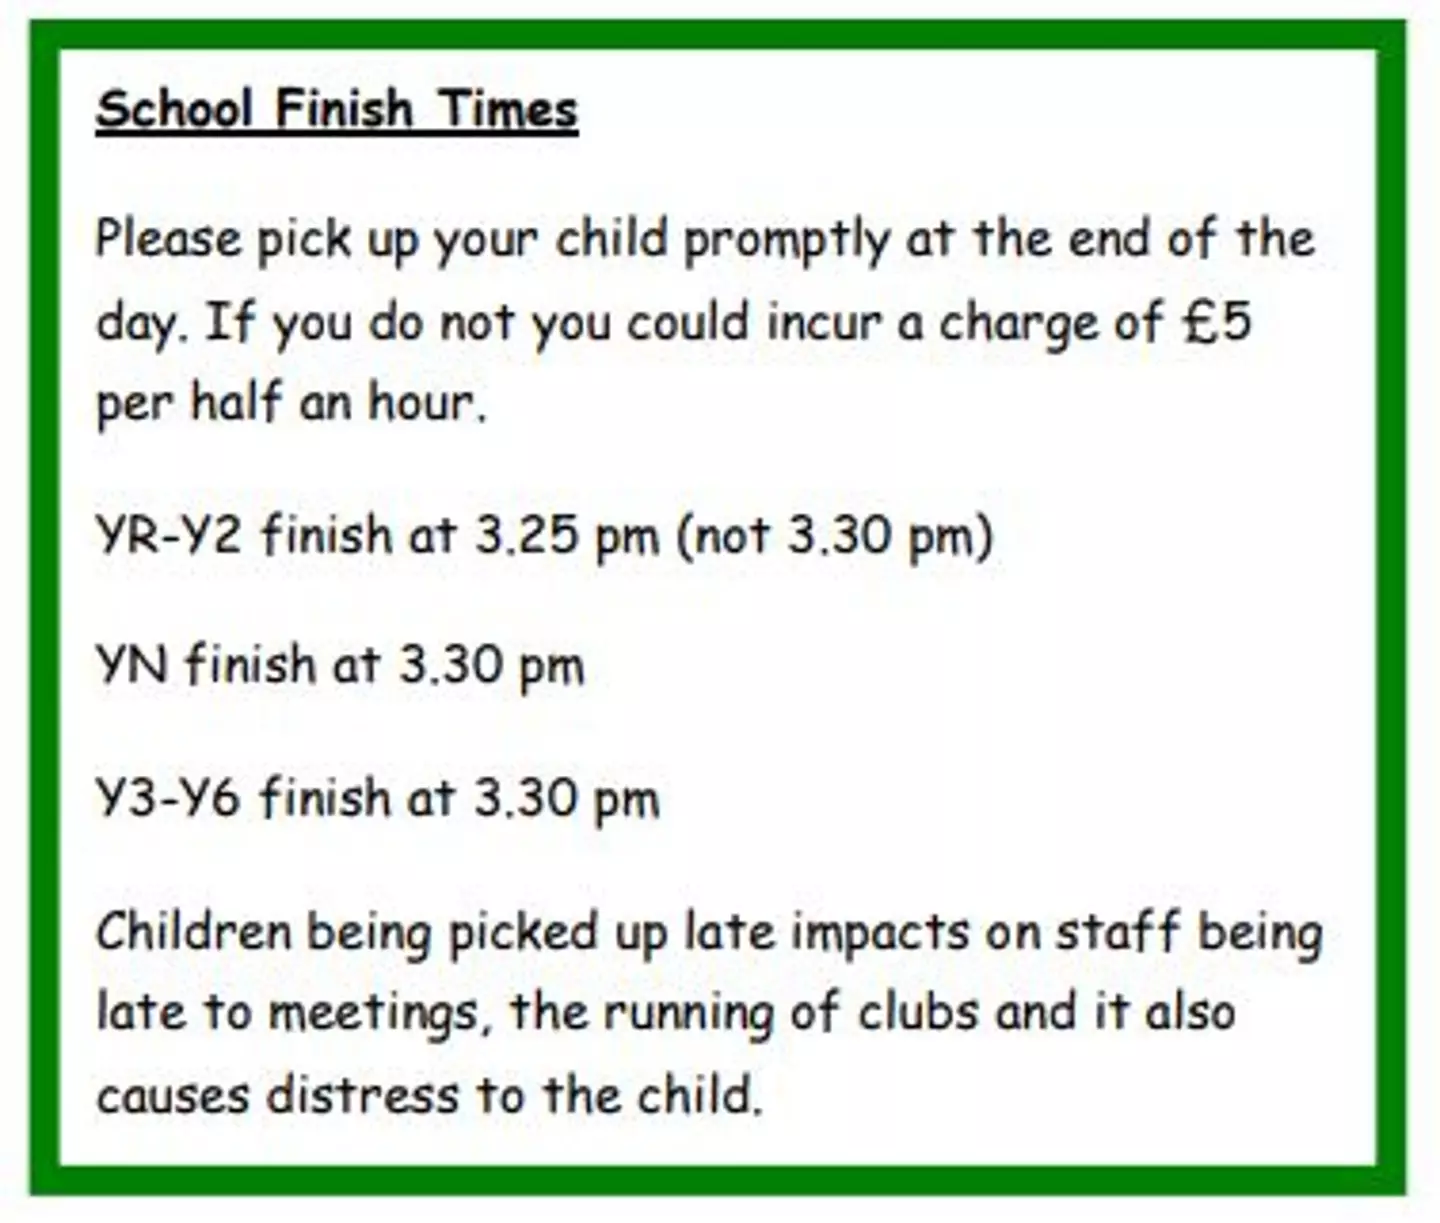 The fine applies to parents who are more than 30 minutes late.